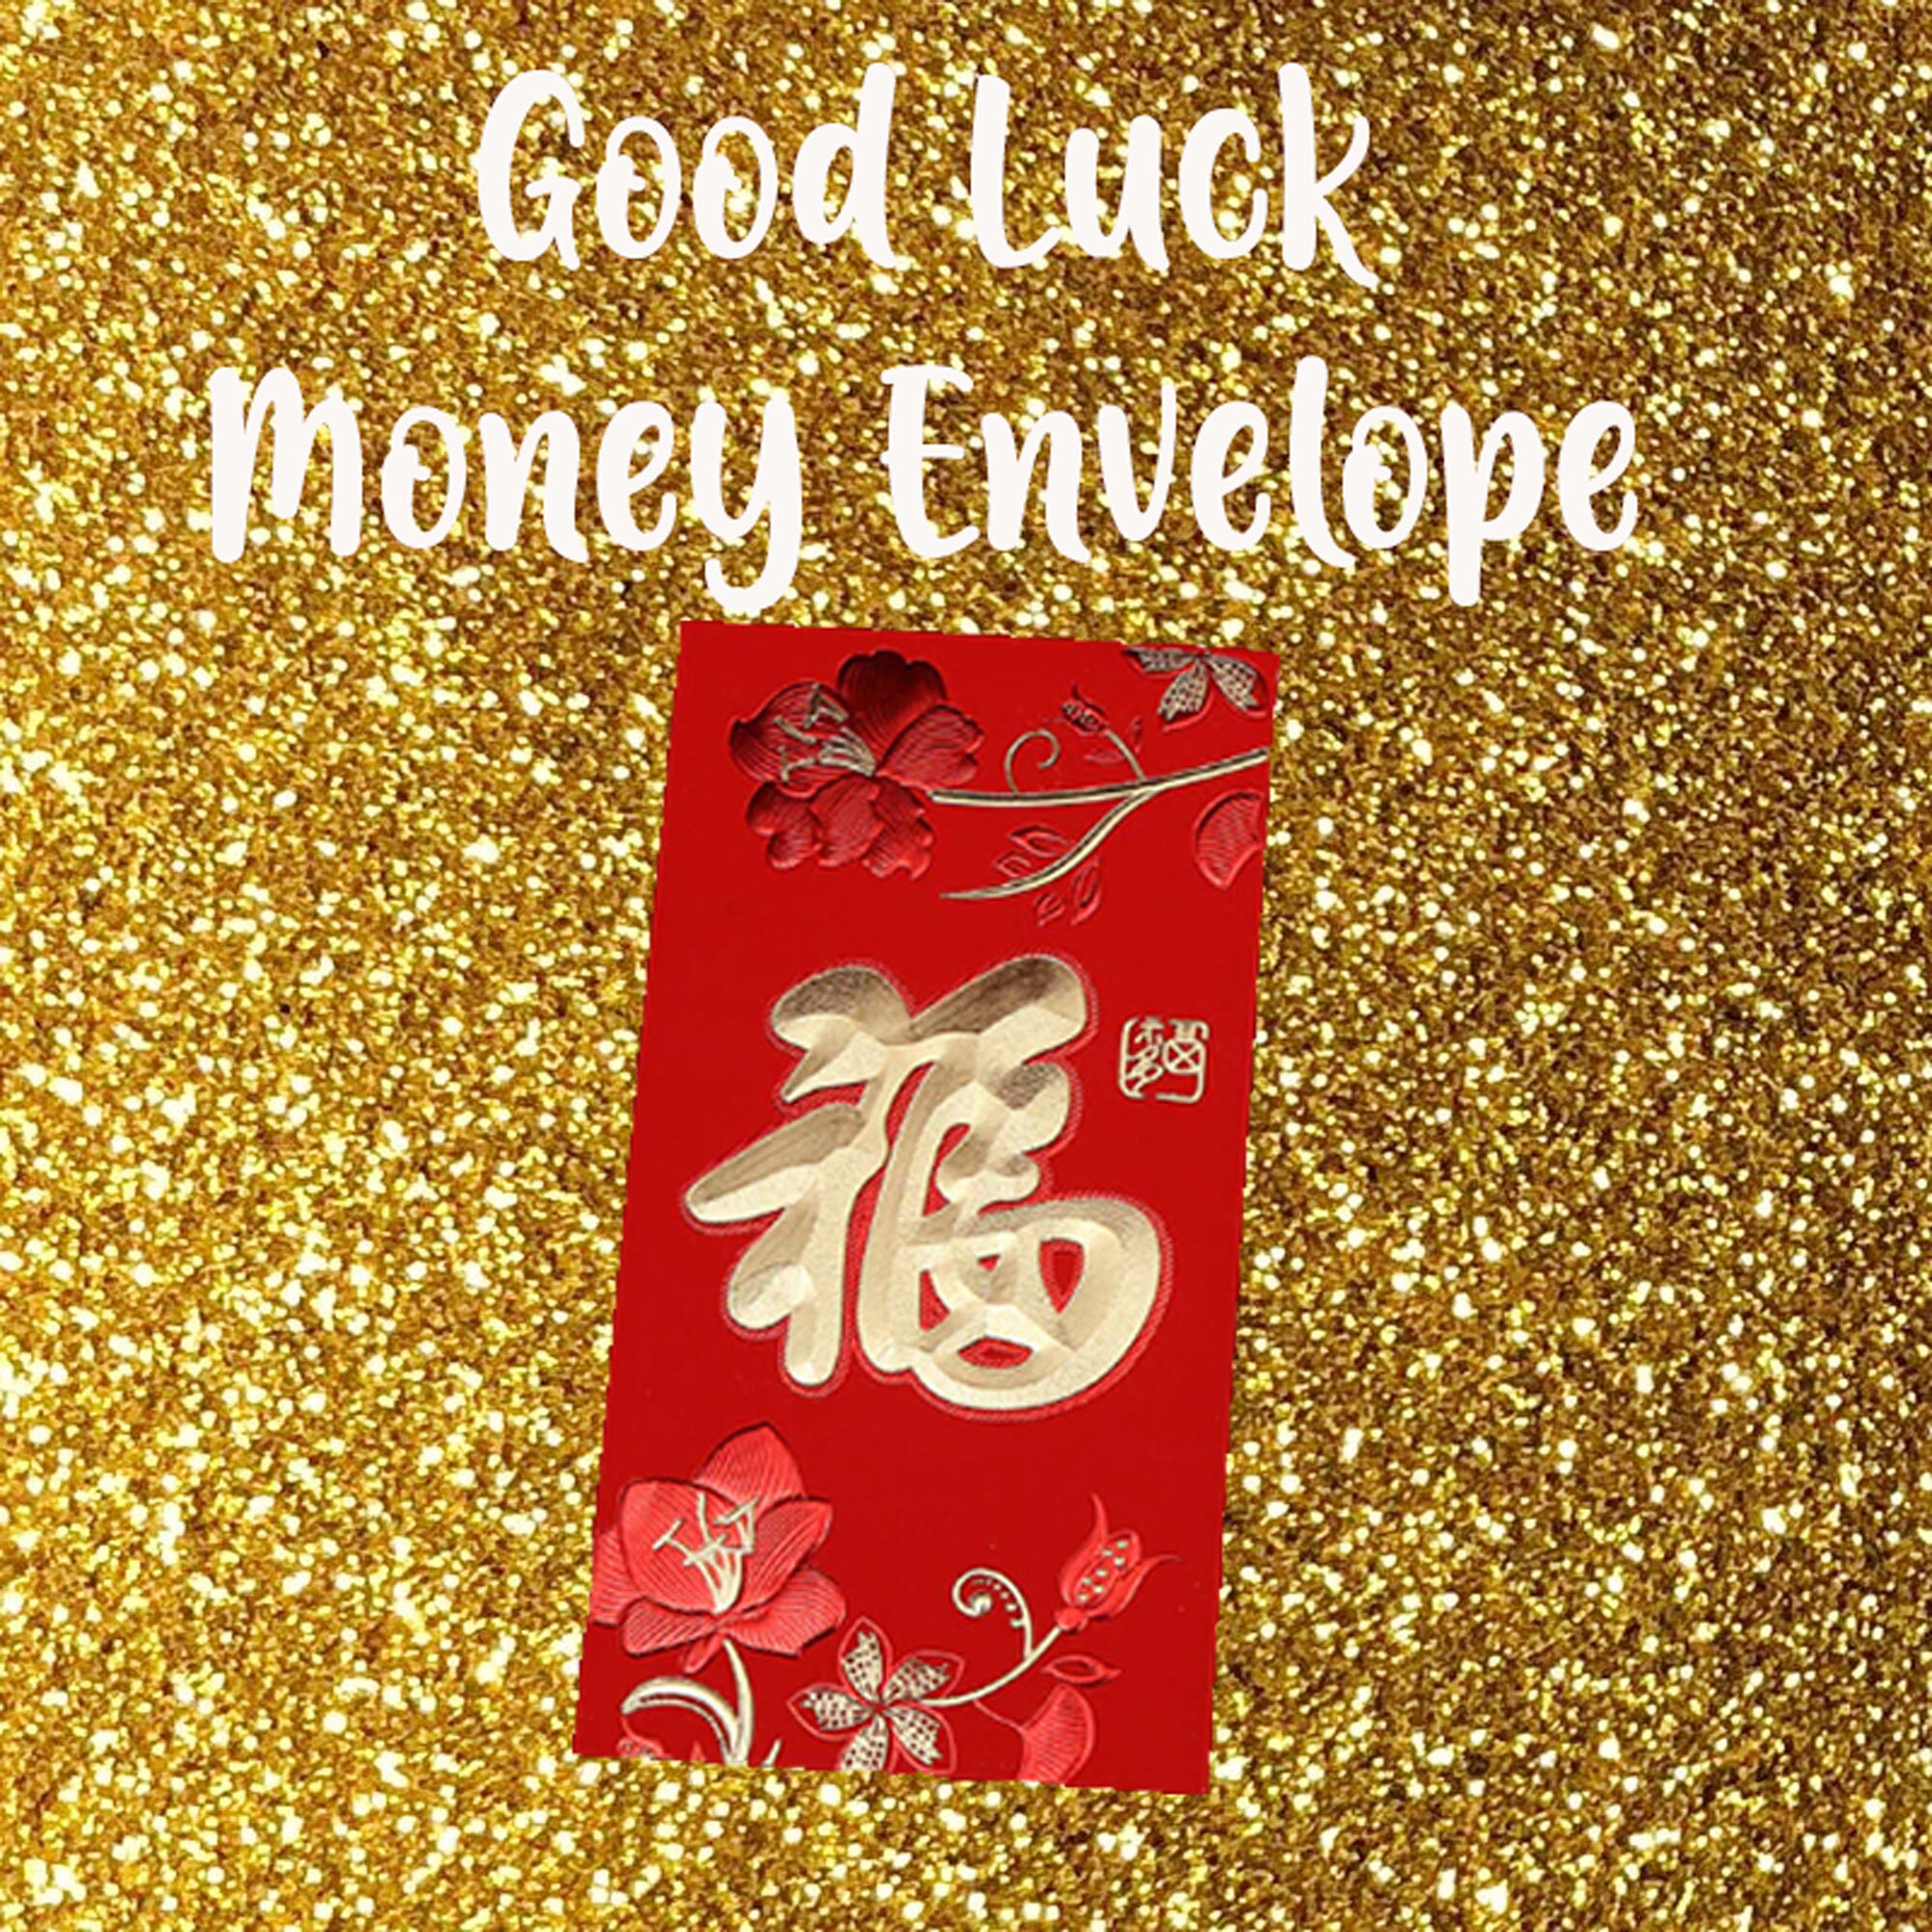 Red envelope new year creative lucky money lucky chinese style